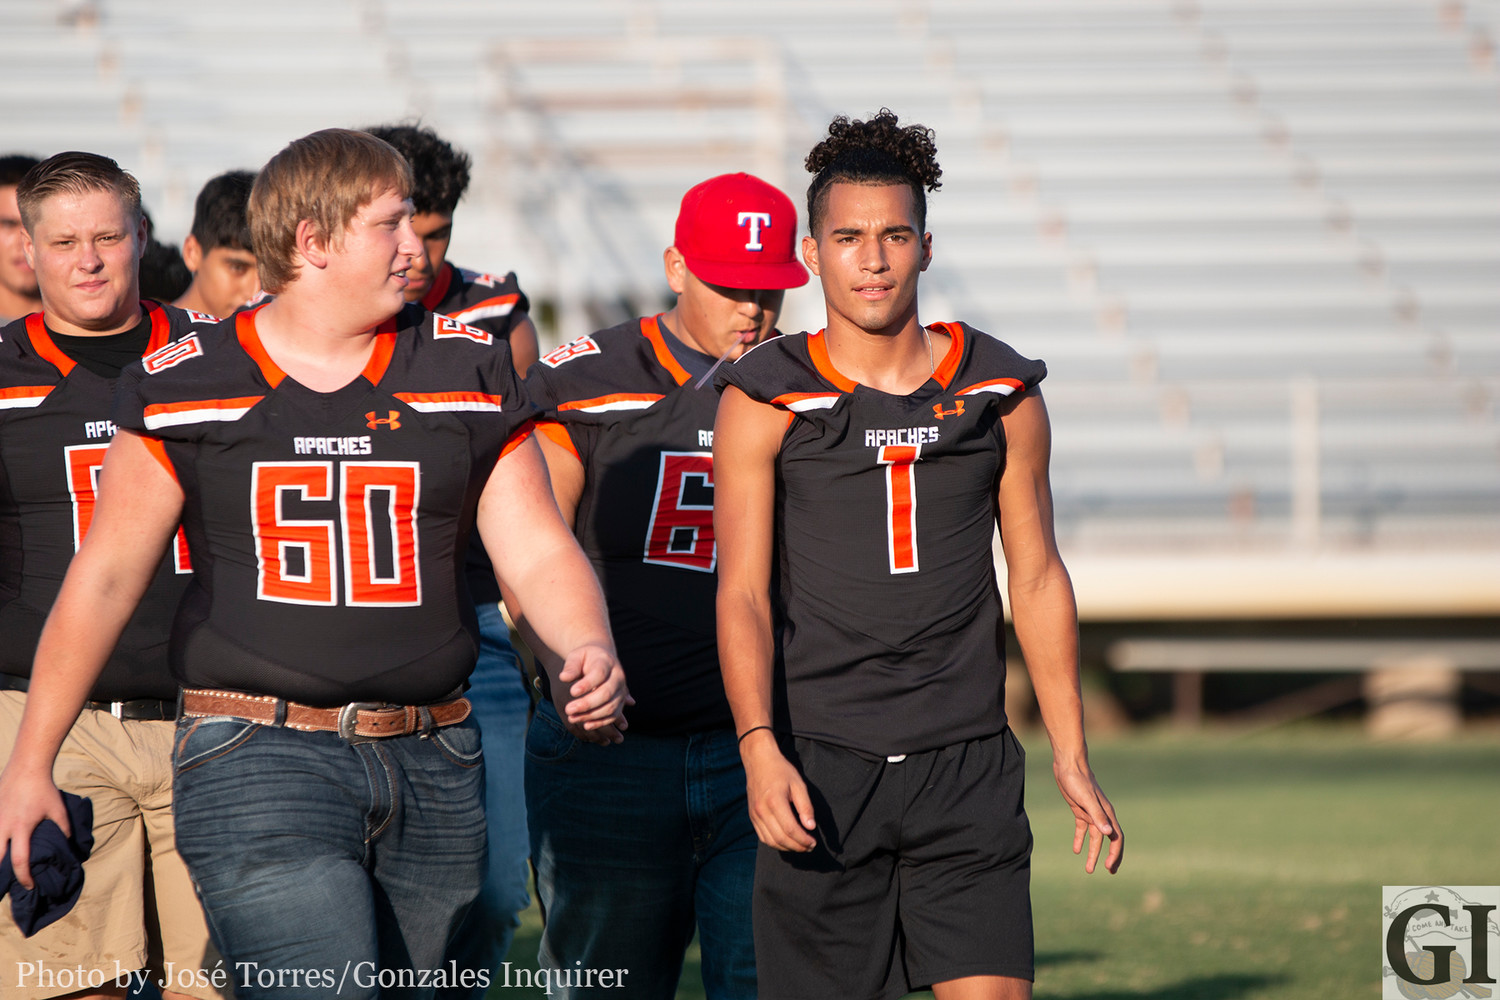 The Apaches officially introduced their teams to the community through their annual Meet the Apache Night last week. Football begins Friday with kickoff set at 7:30 p.m. at Geronimo.